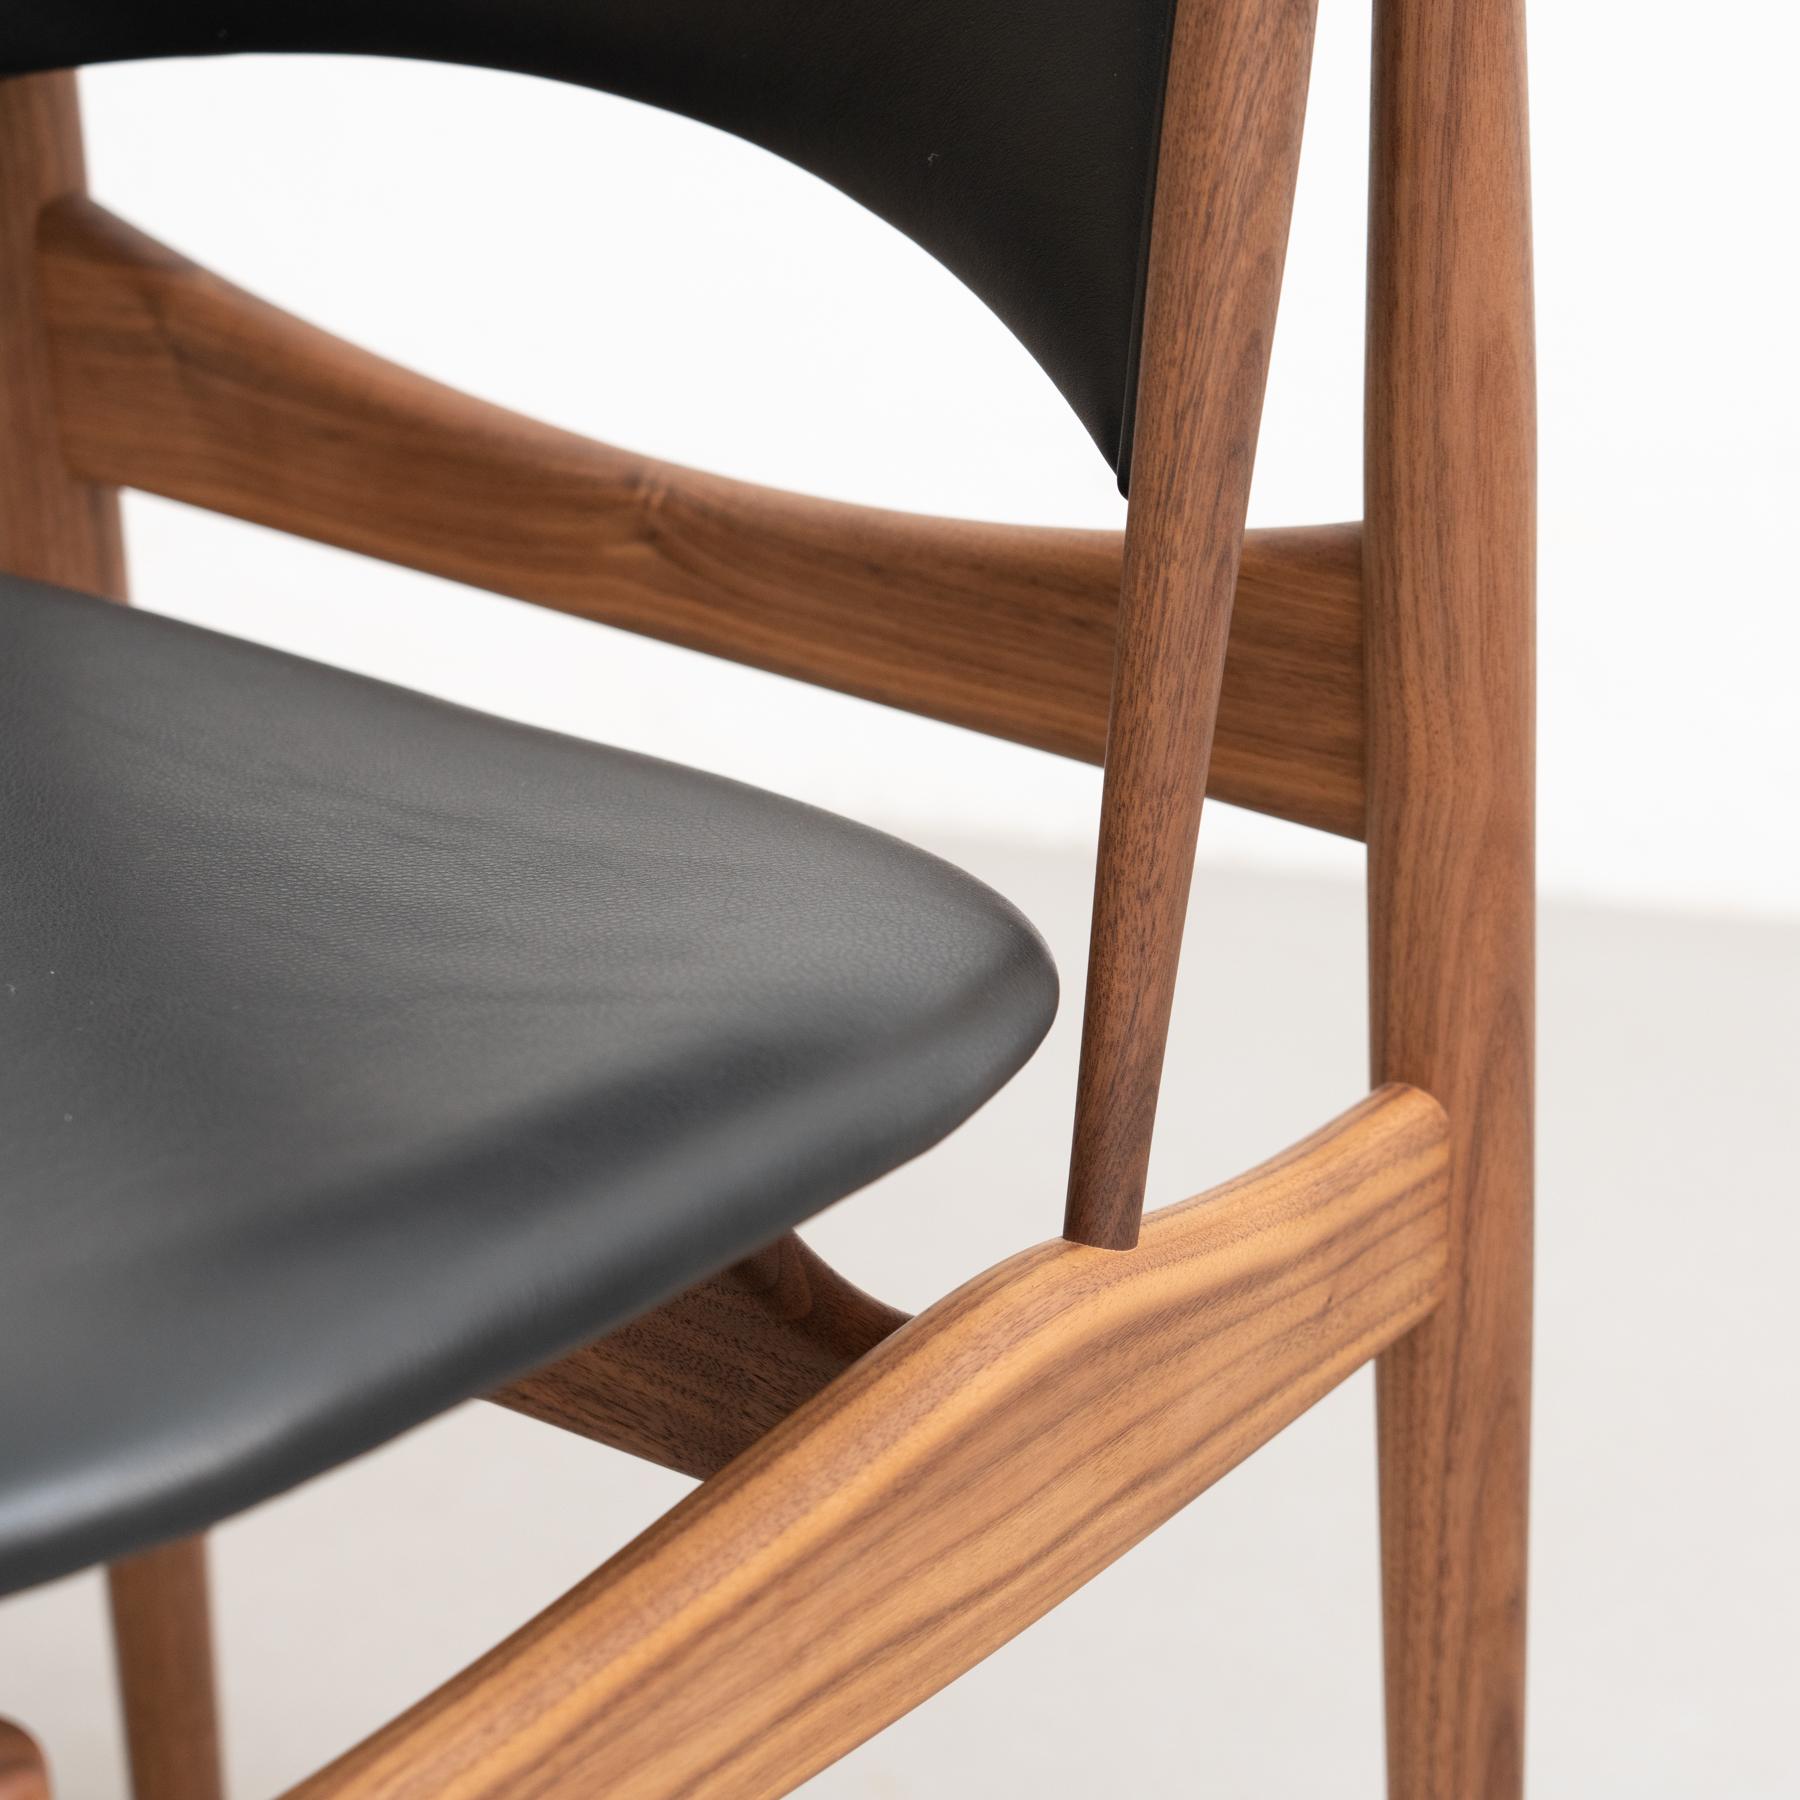 Danish Egyptian Armchair in Wood and Leather, by Finn Juhl